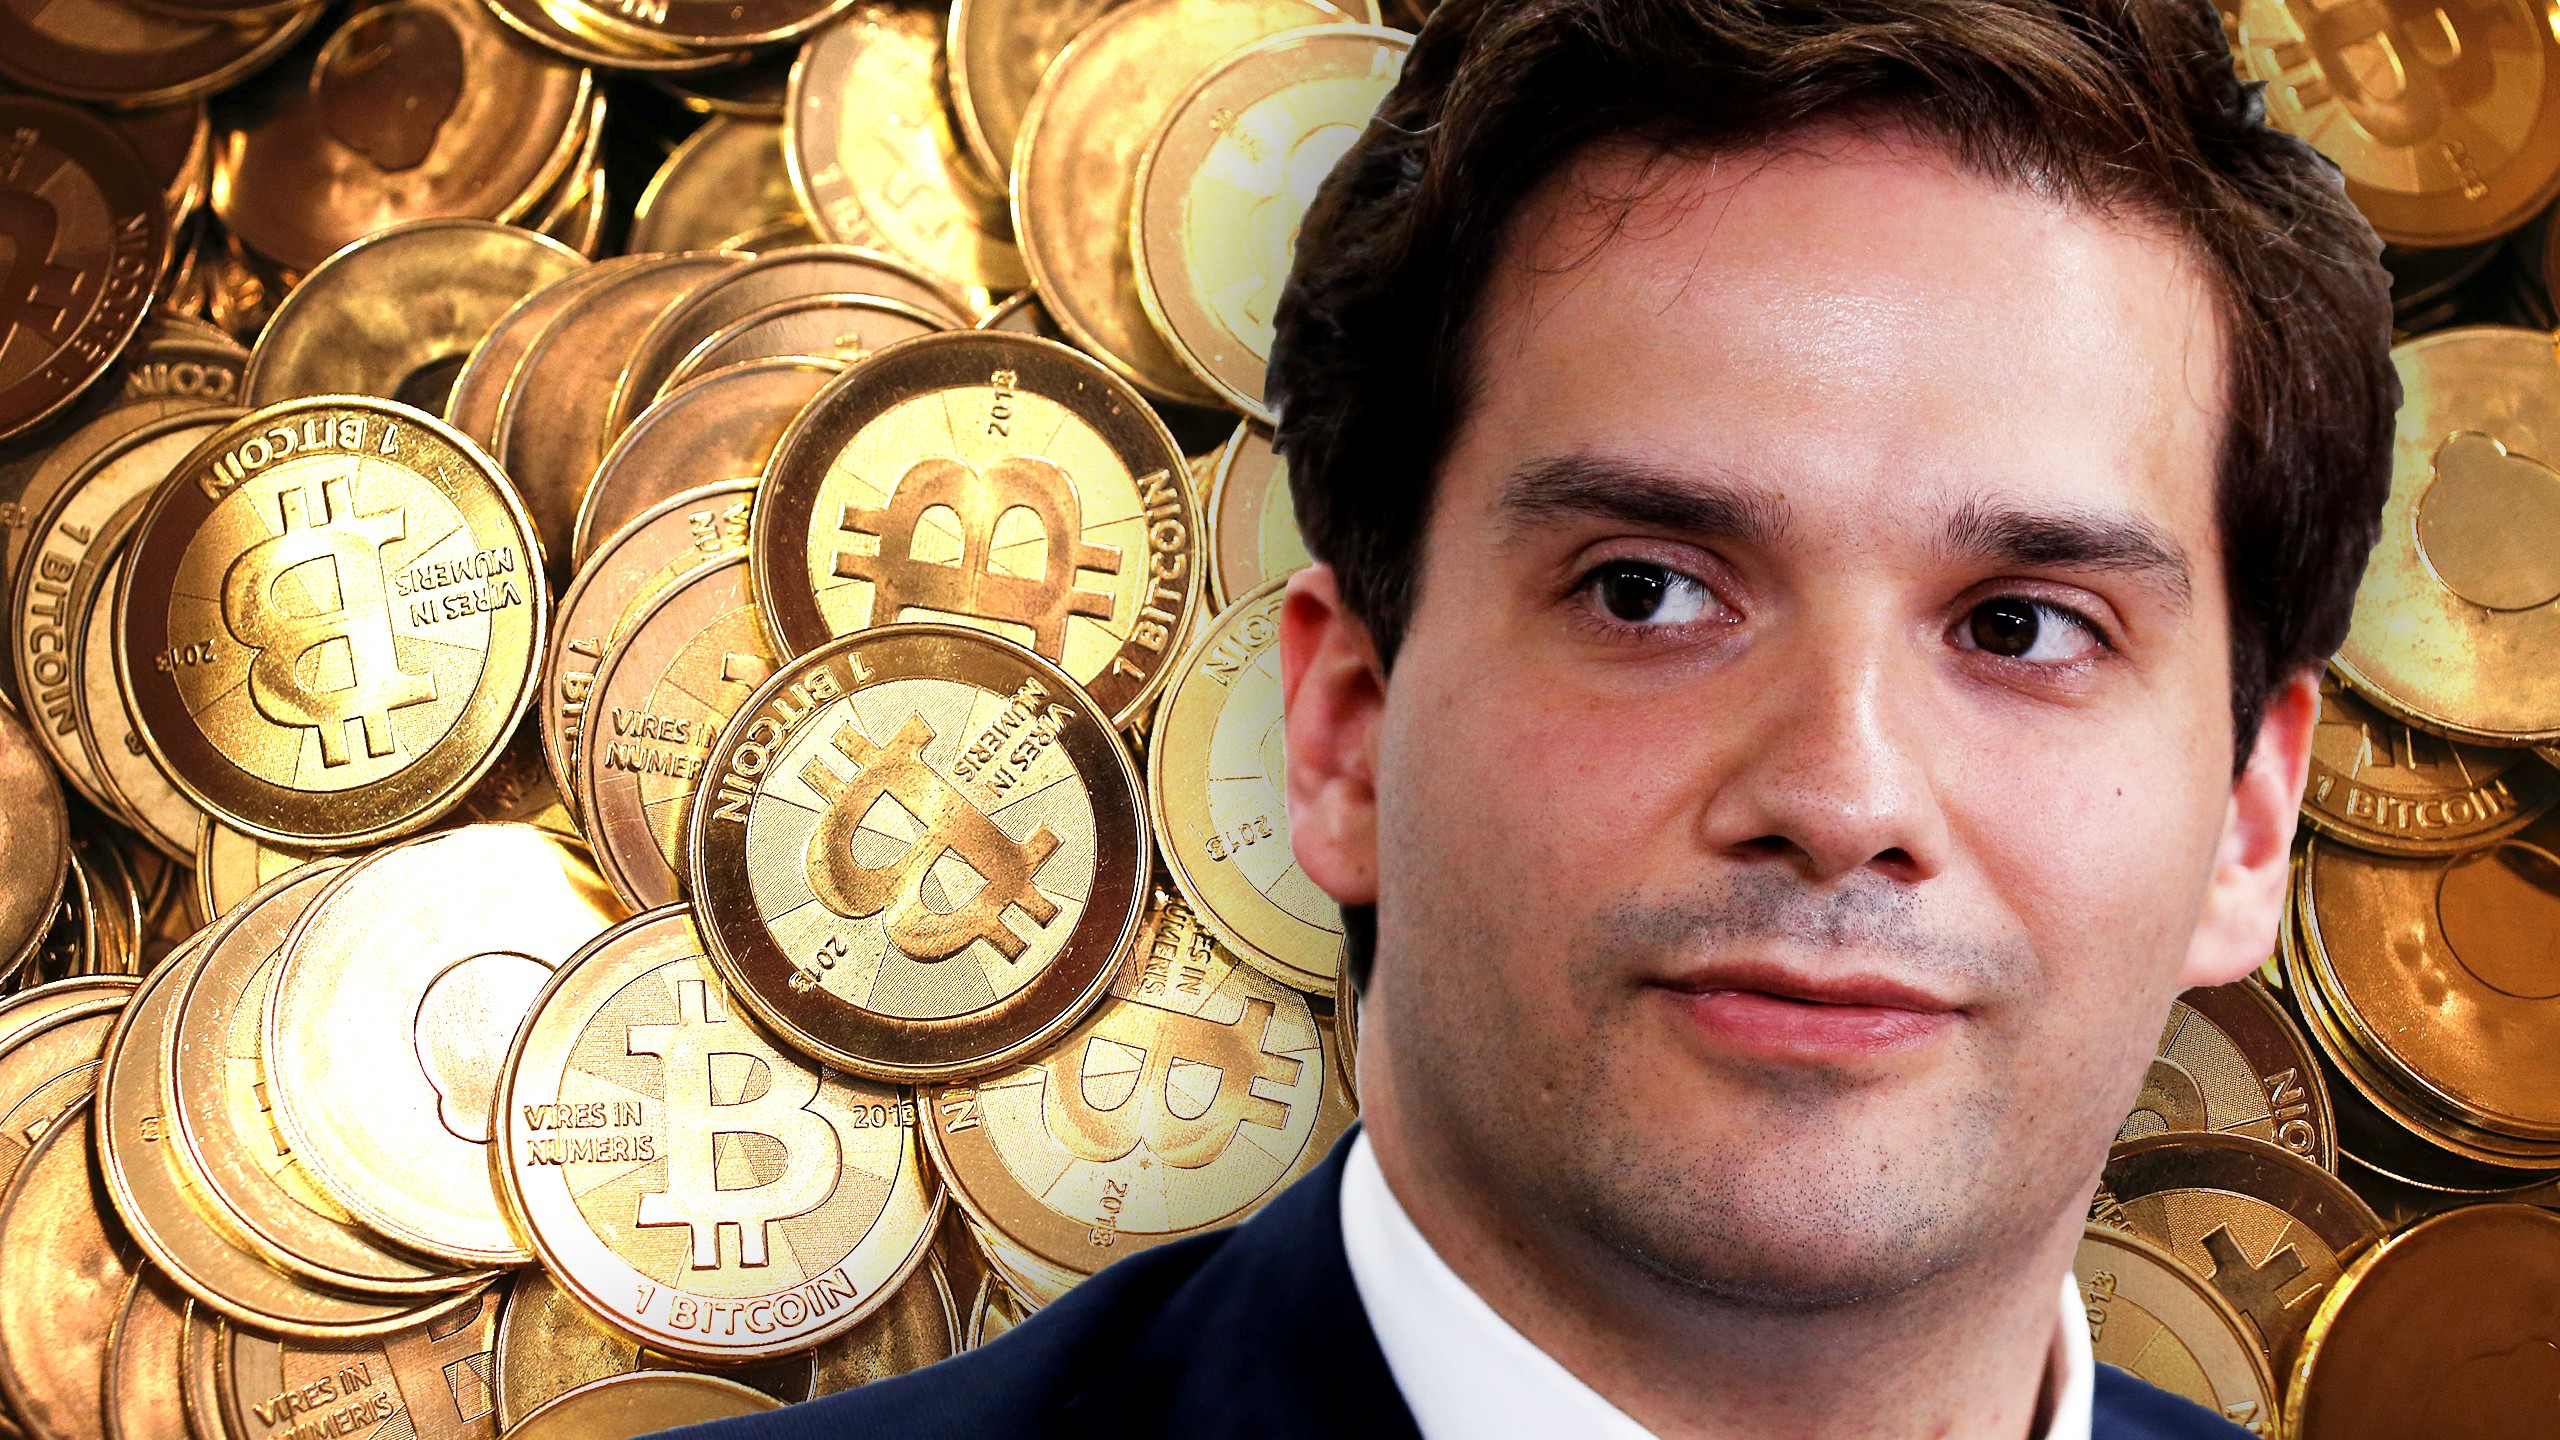 http://www.thedailybeast.com/the-worlds-most-infamous-billion-dollar-bitcoin-launderer-nabbed-at-last?via=newsletter&source=DDAfternoon